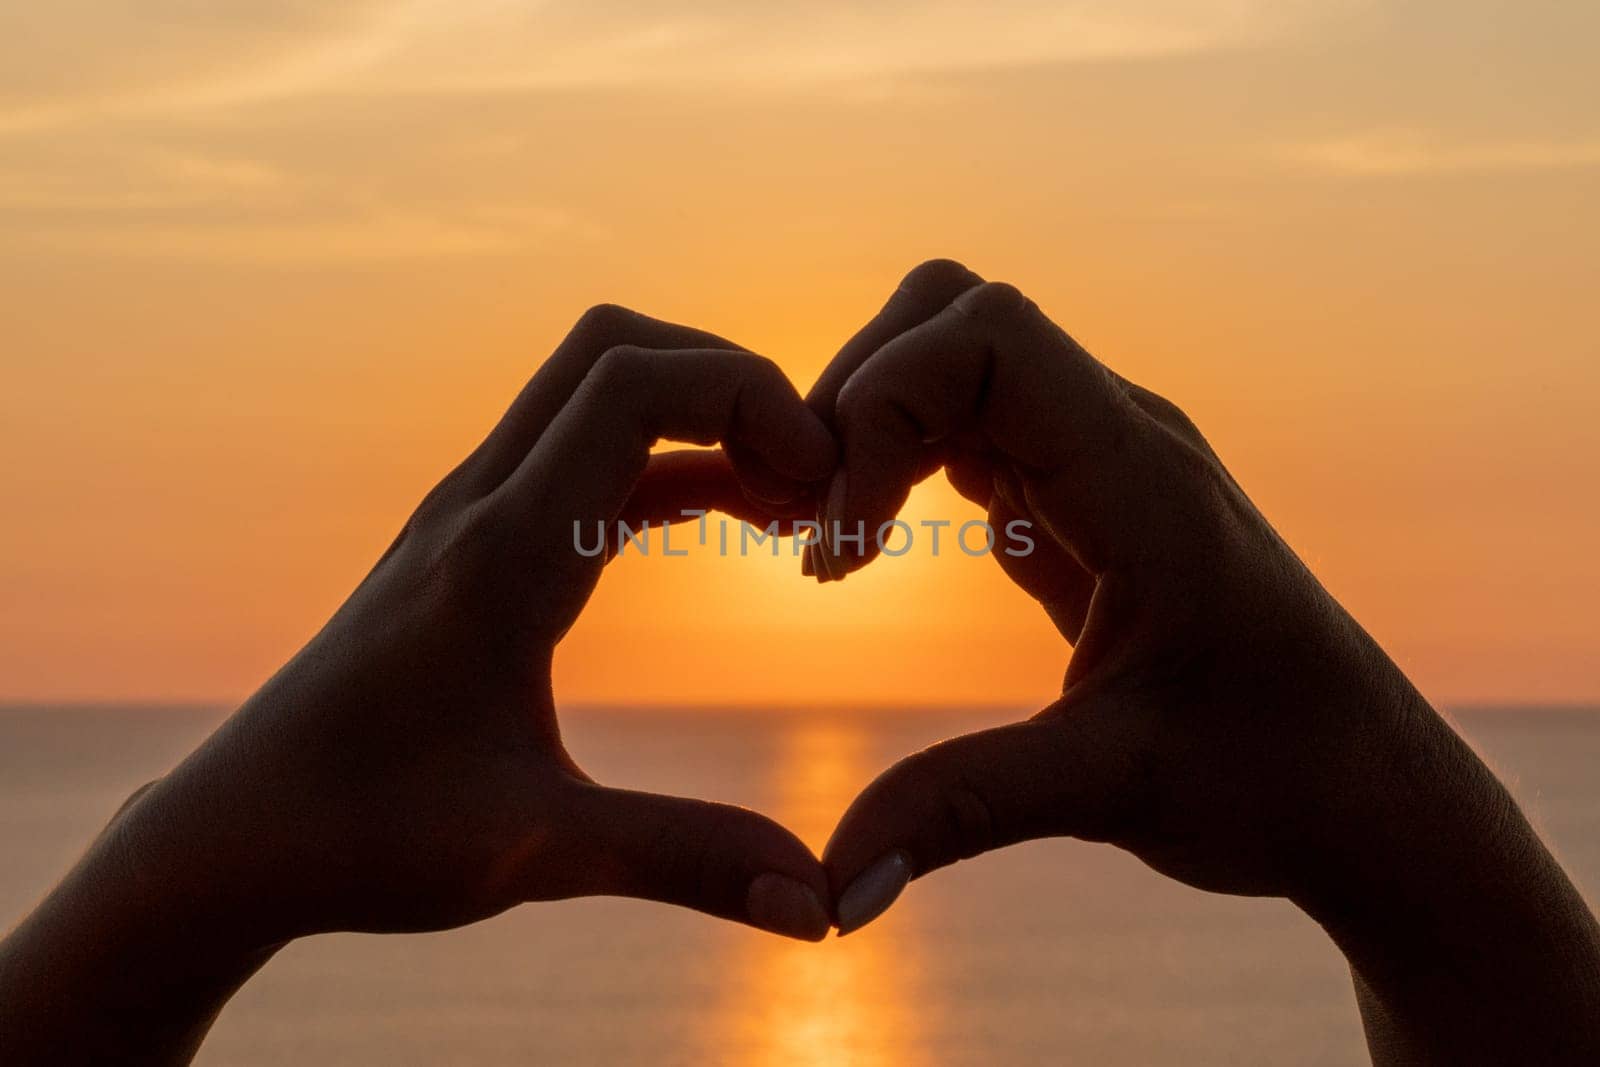 Hands heart sea sanset. The image features a beautiful sunset with two people holding their hands up in the air, forming a heart shape